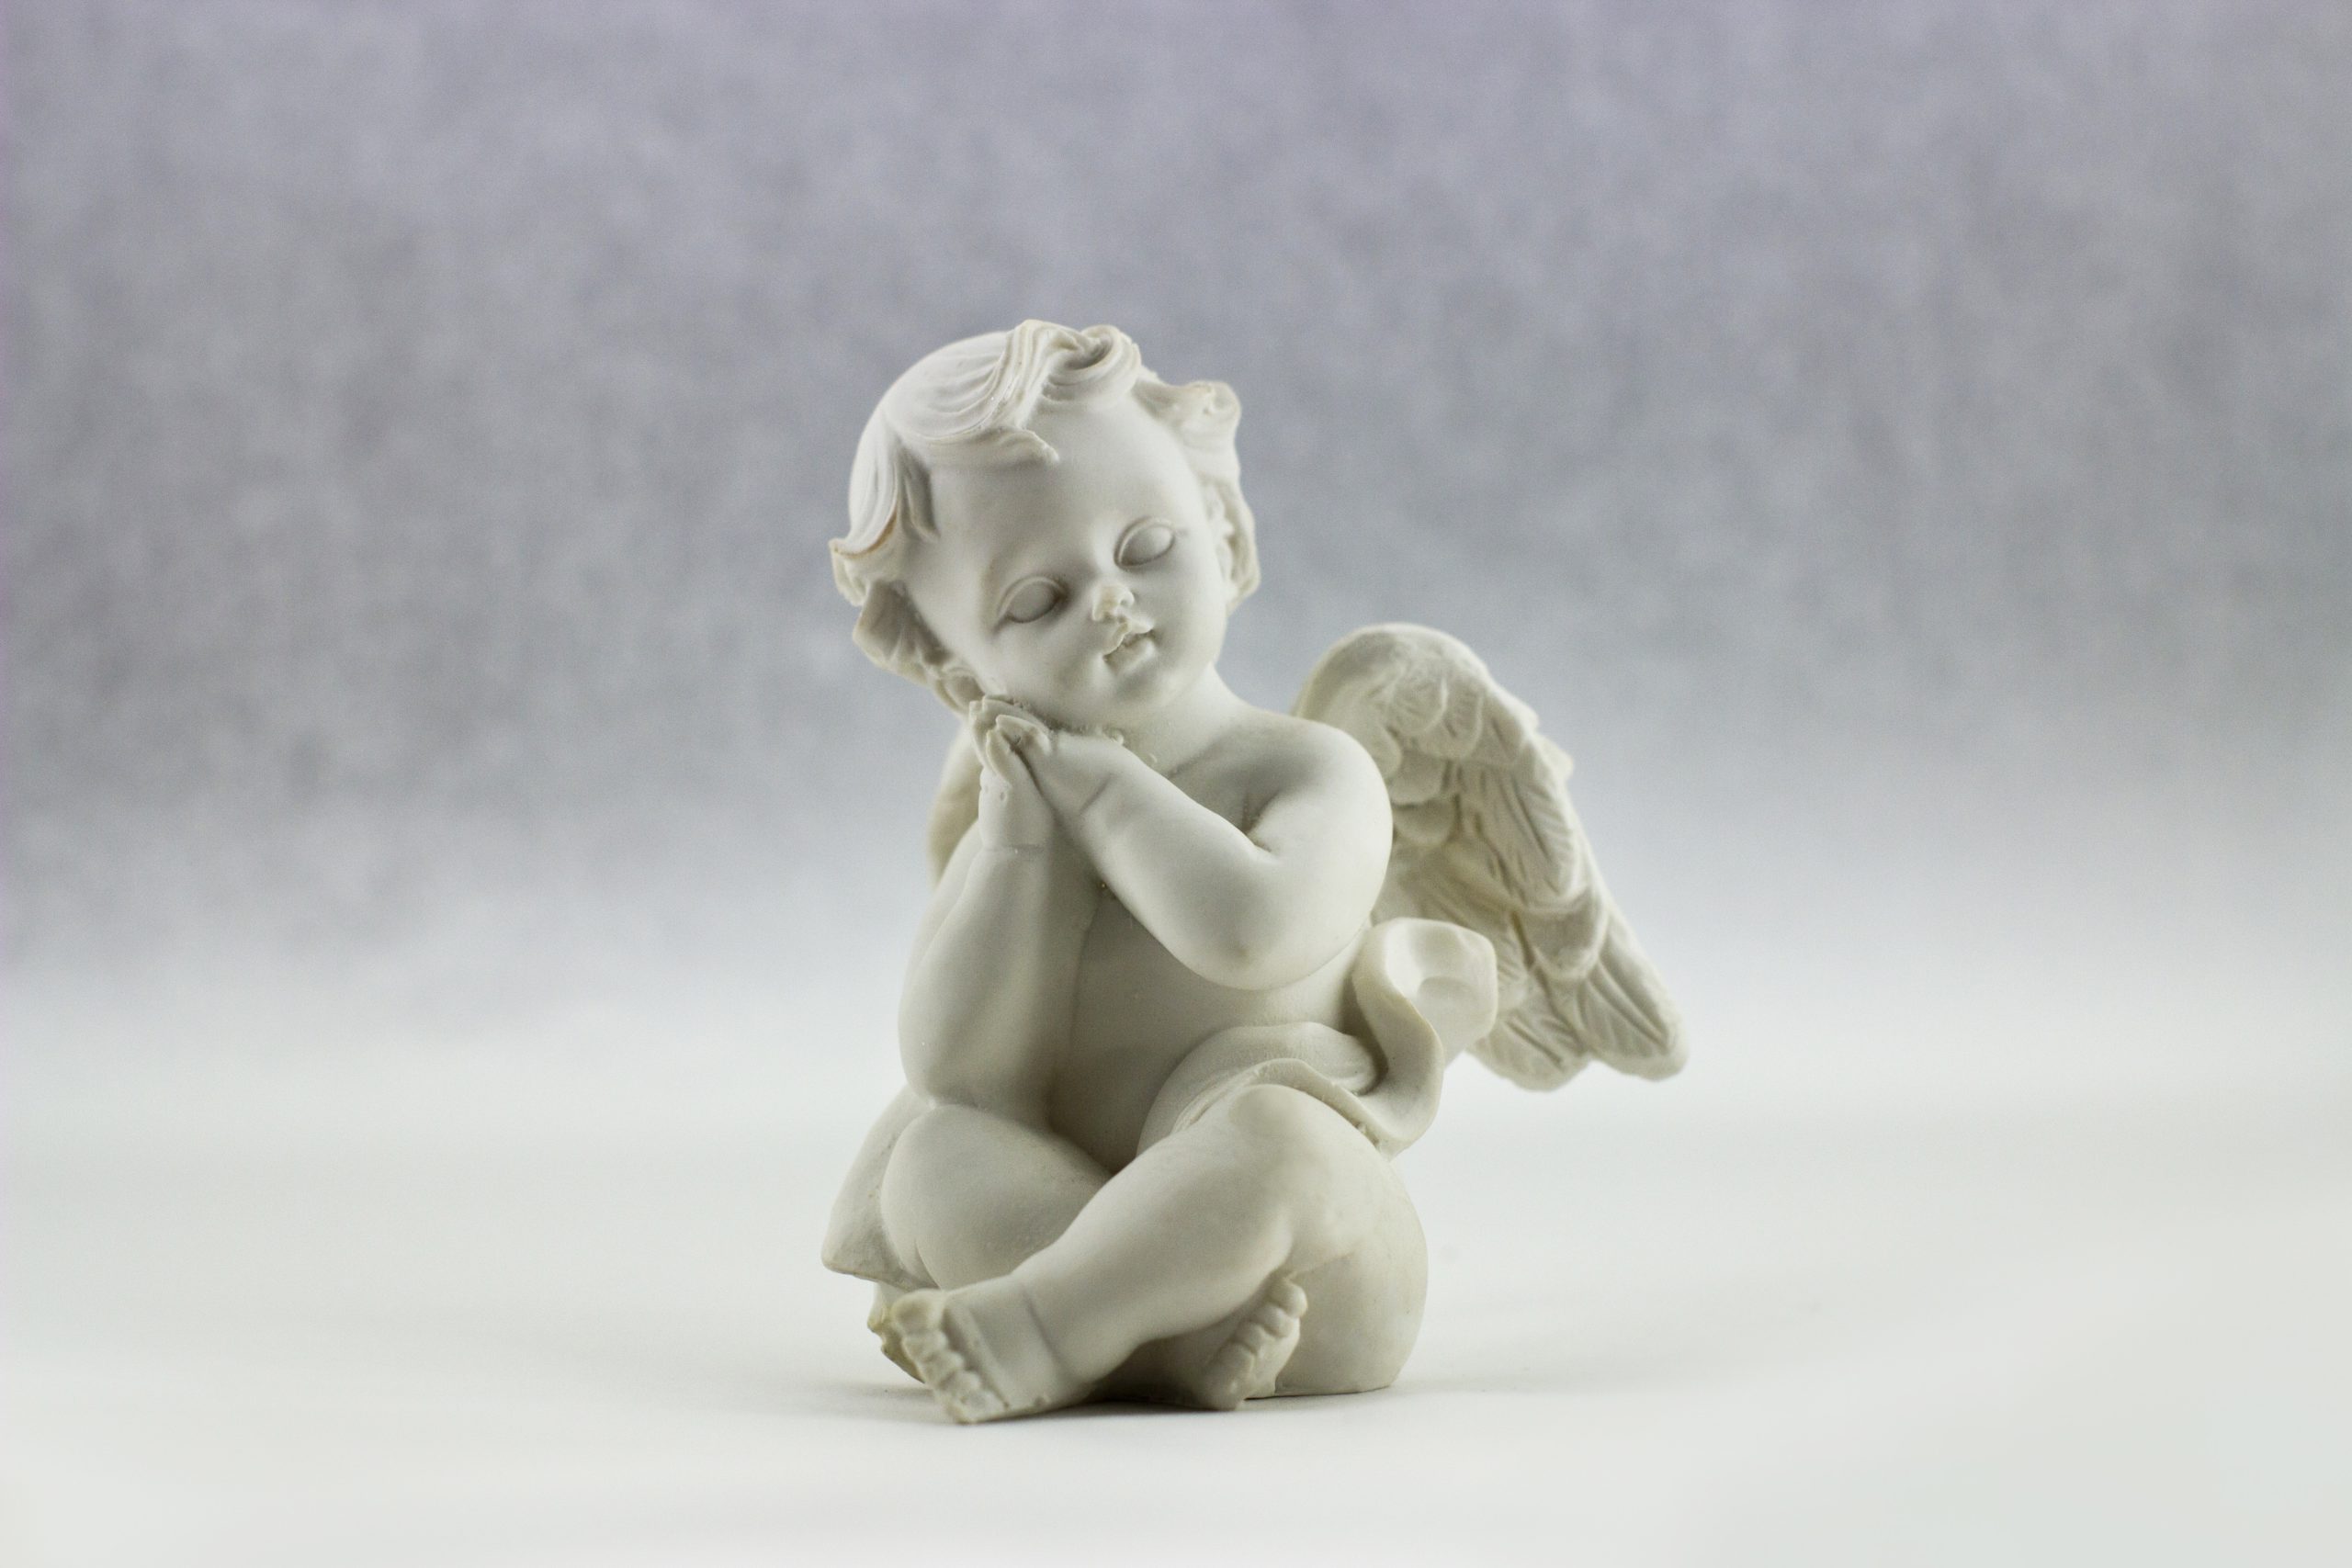 Amazing Lladro Gres and Lladro Figurine History You Should Know